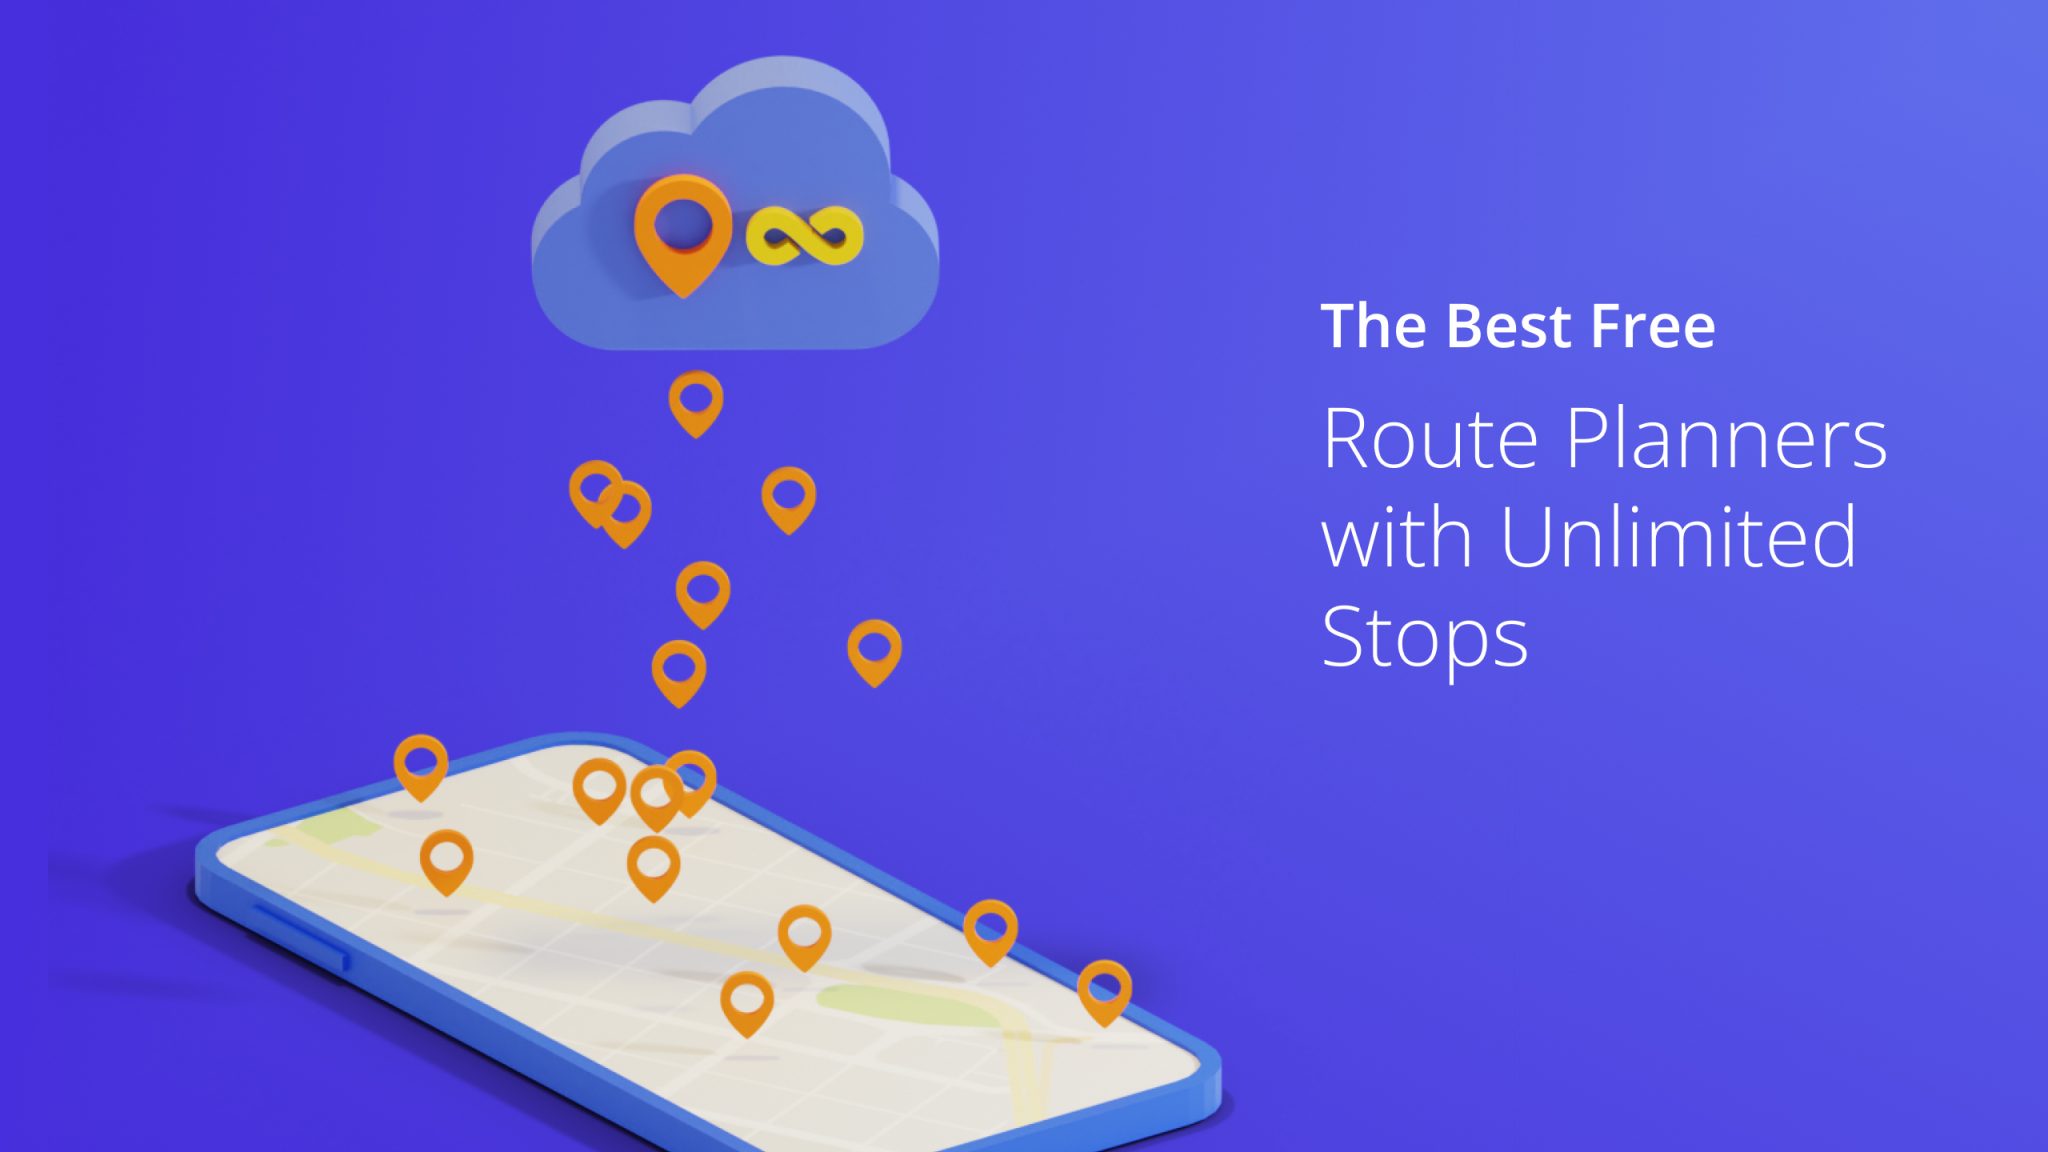 Dadba222 The Best Free Route Planners With Unlimited Stops@2x 2048x1152 